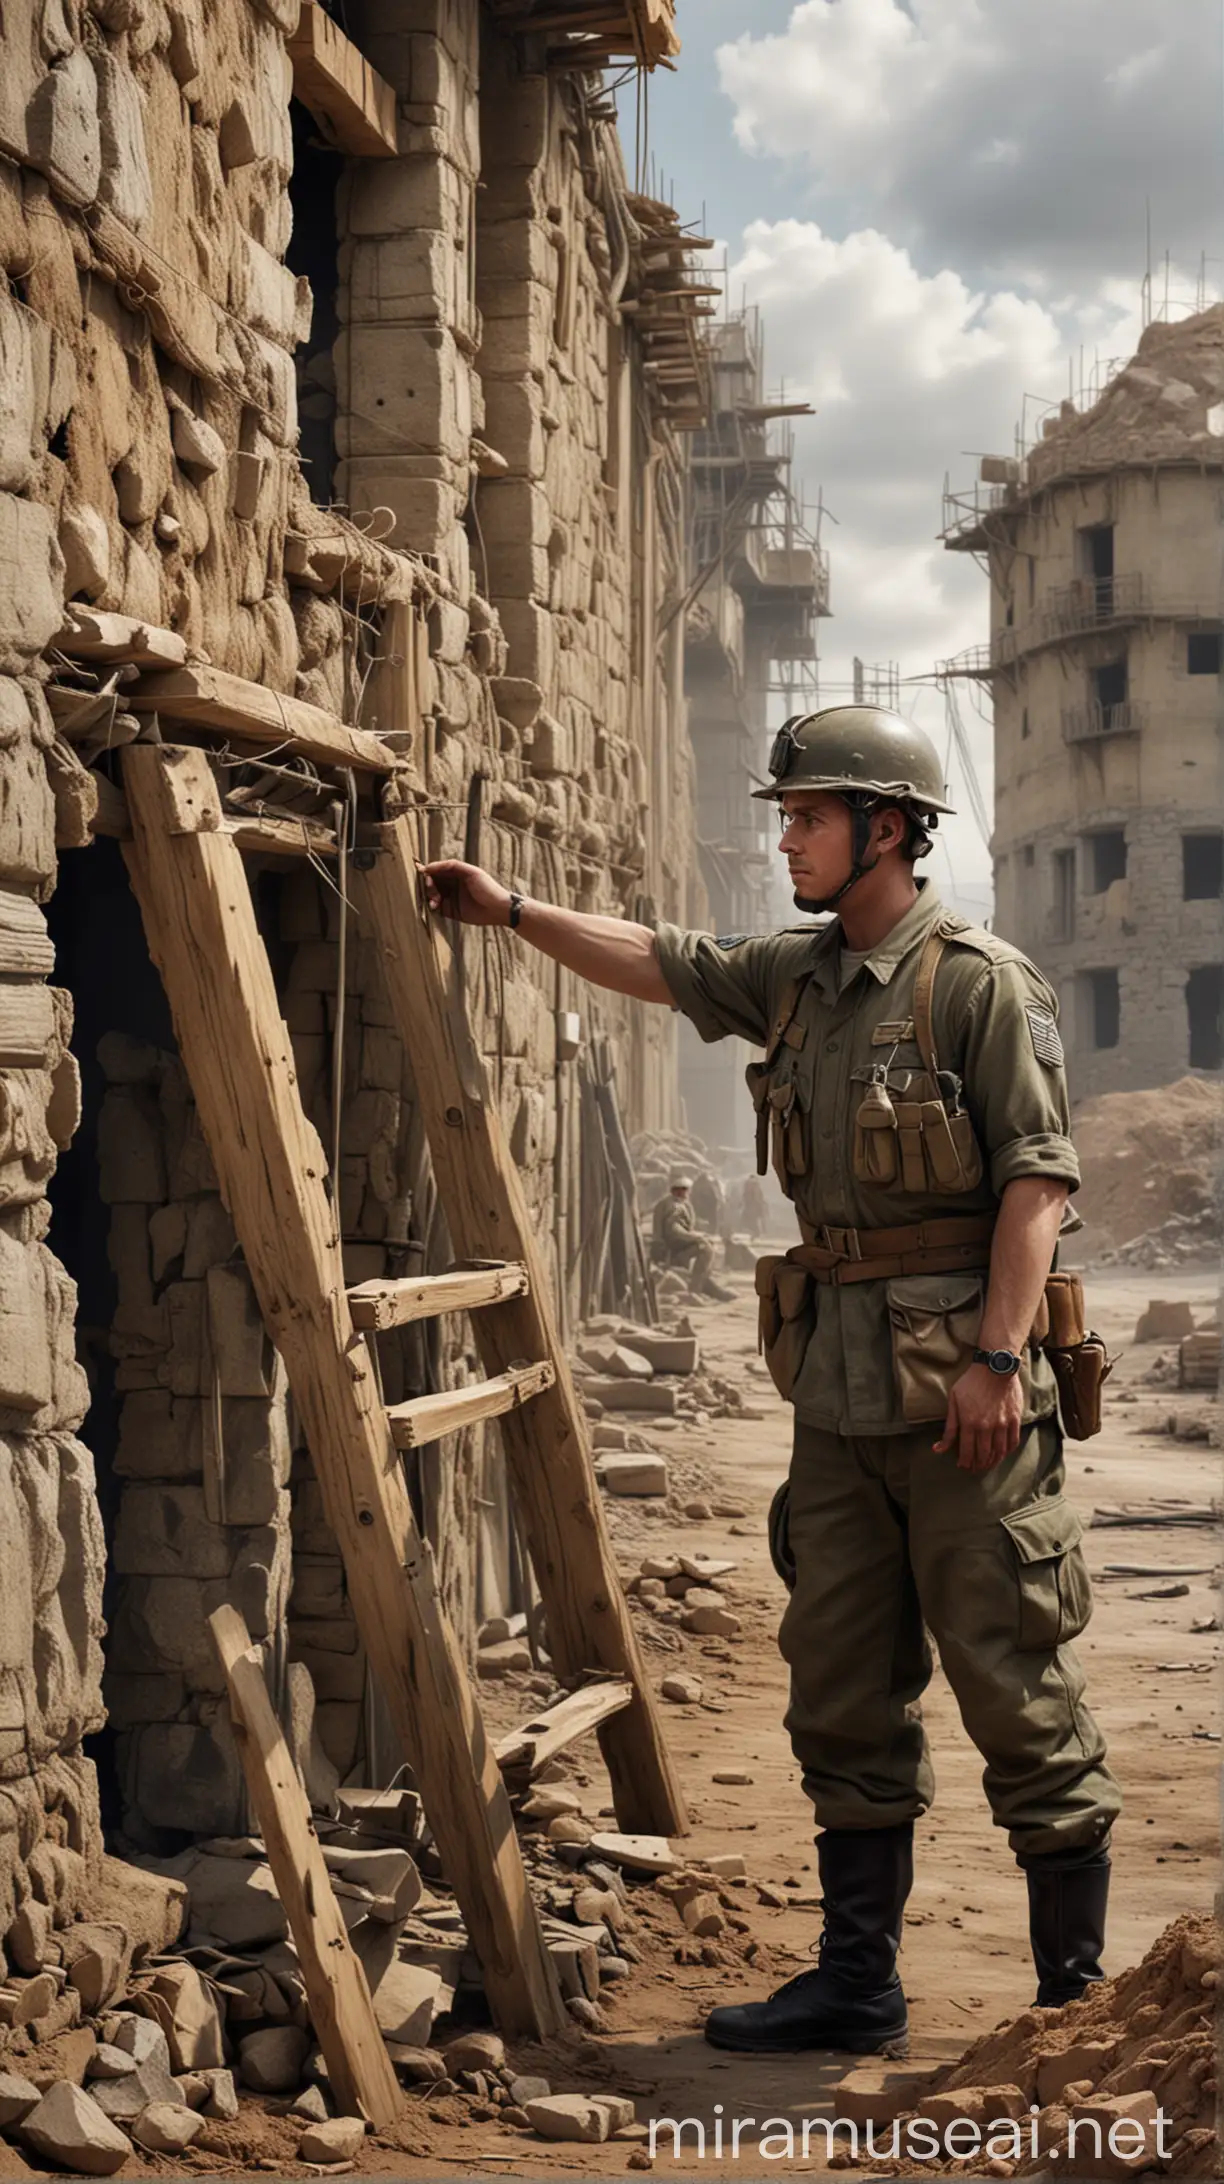 Depict Lee working as a military engineer, designing fortifications or inspecting a construction site. hyper realistic